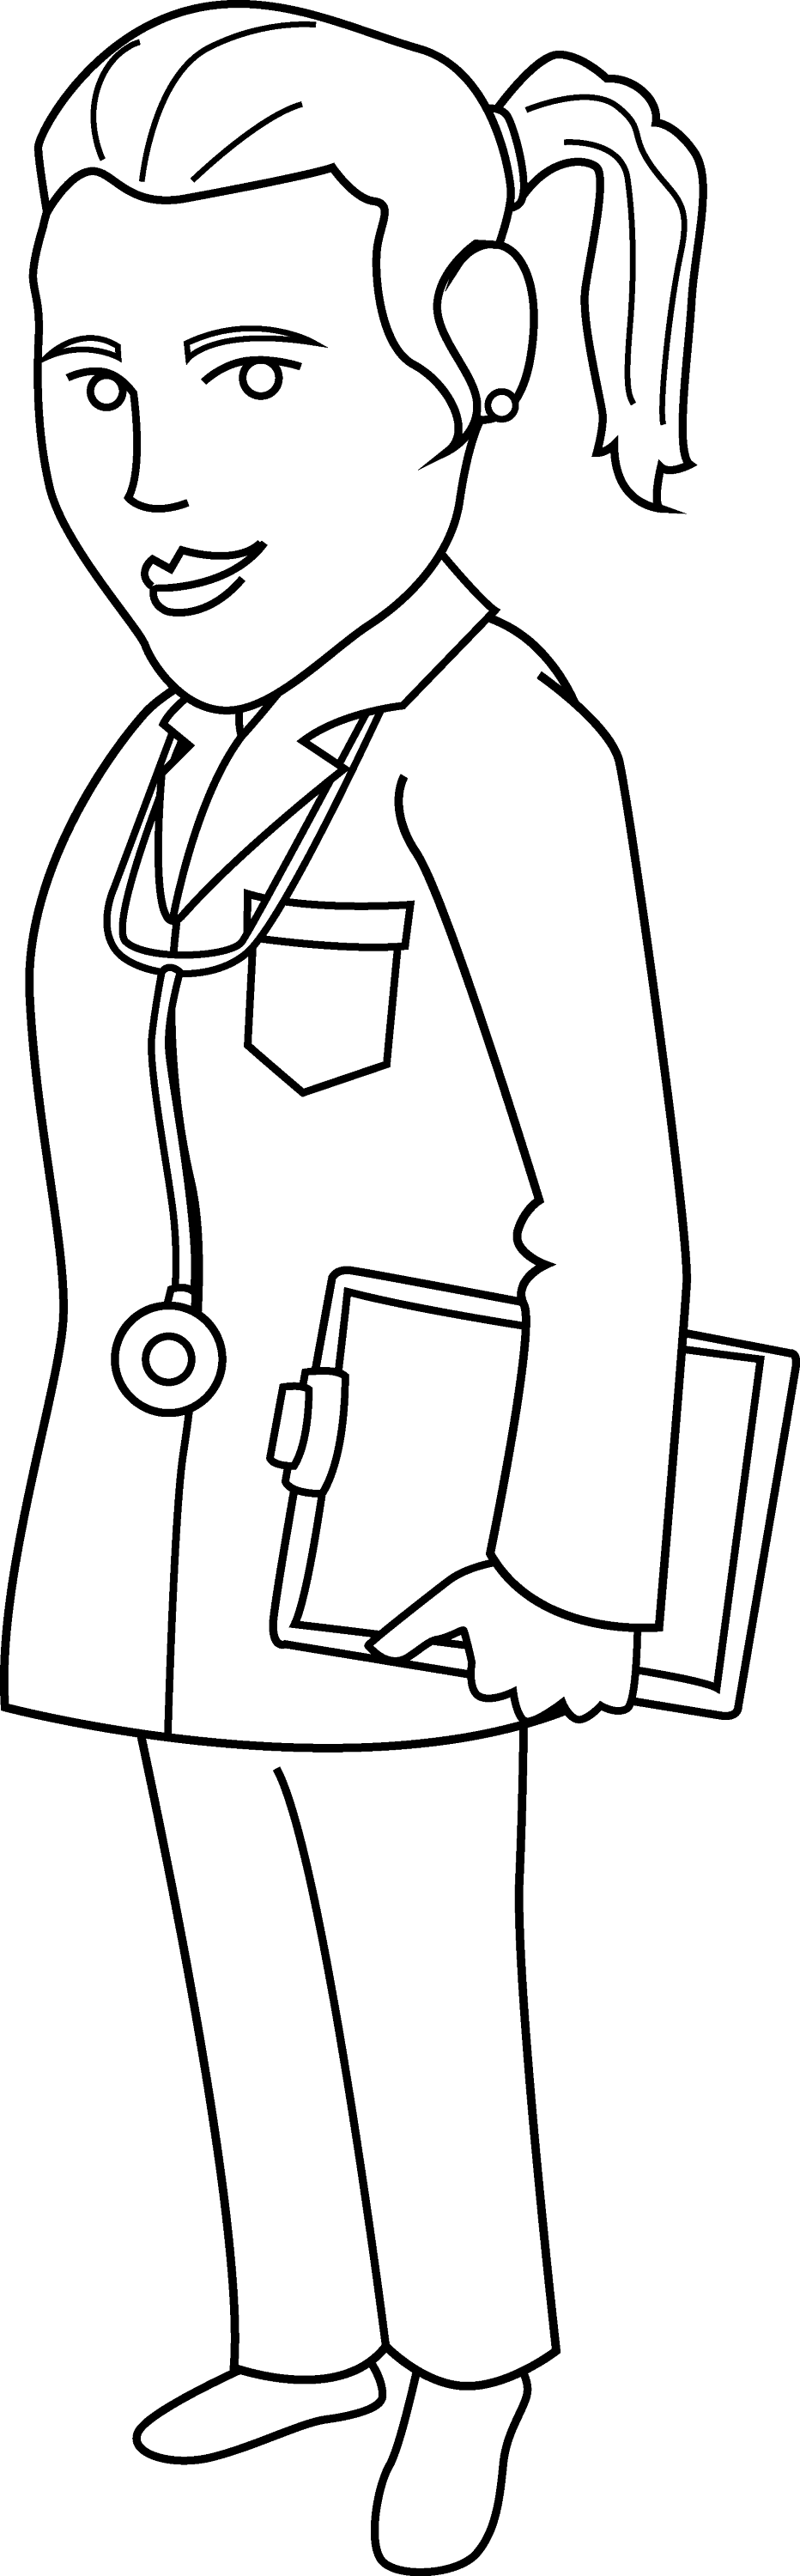 Download Doctor Coloring Page - Free Clip Art